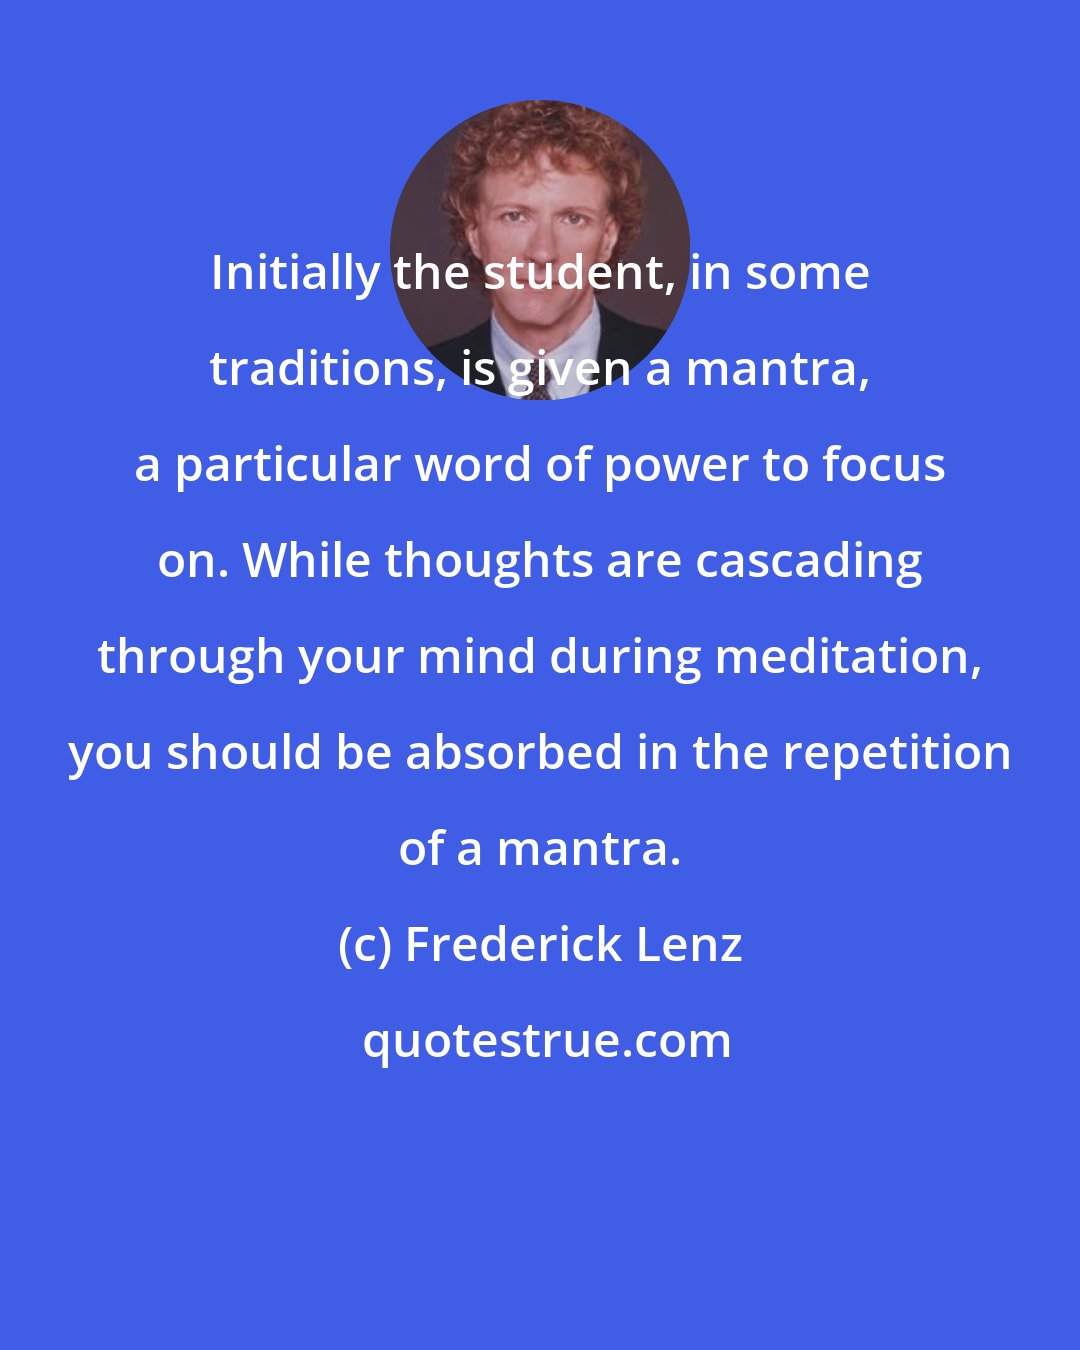 Frederick Lenz: Initially the student, in some traditions, is given a mantra, a particular word of power to focus on. While thoughts are cascading through your mind during meditation, you should be absorbed in the repetition of a mantra.